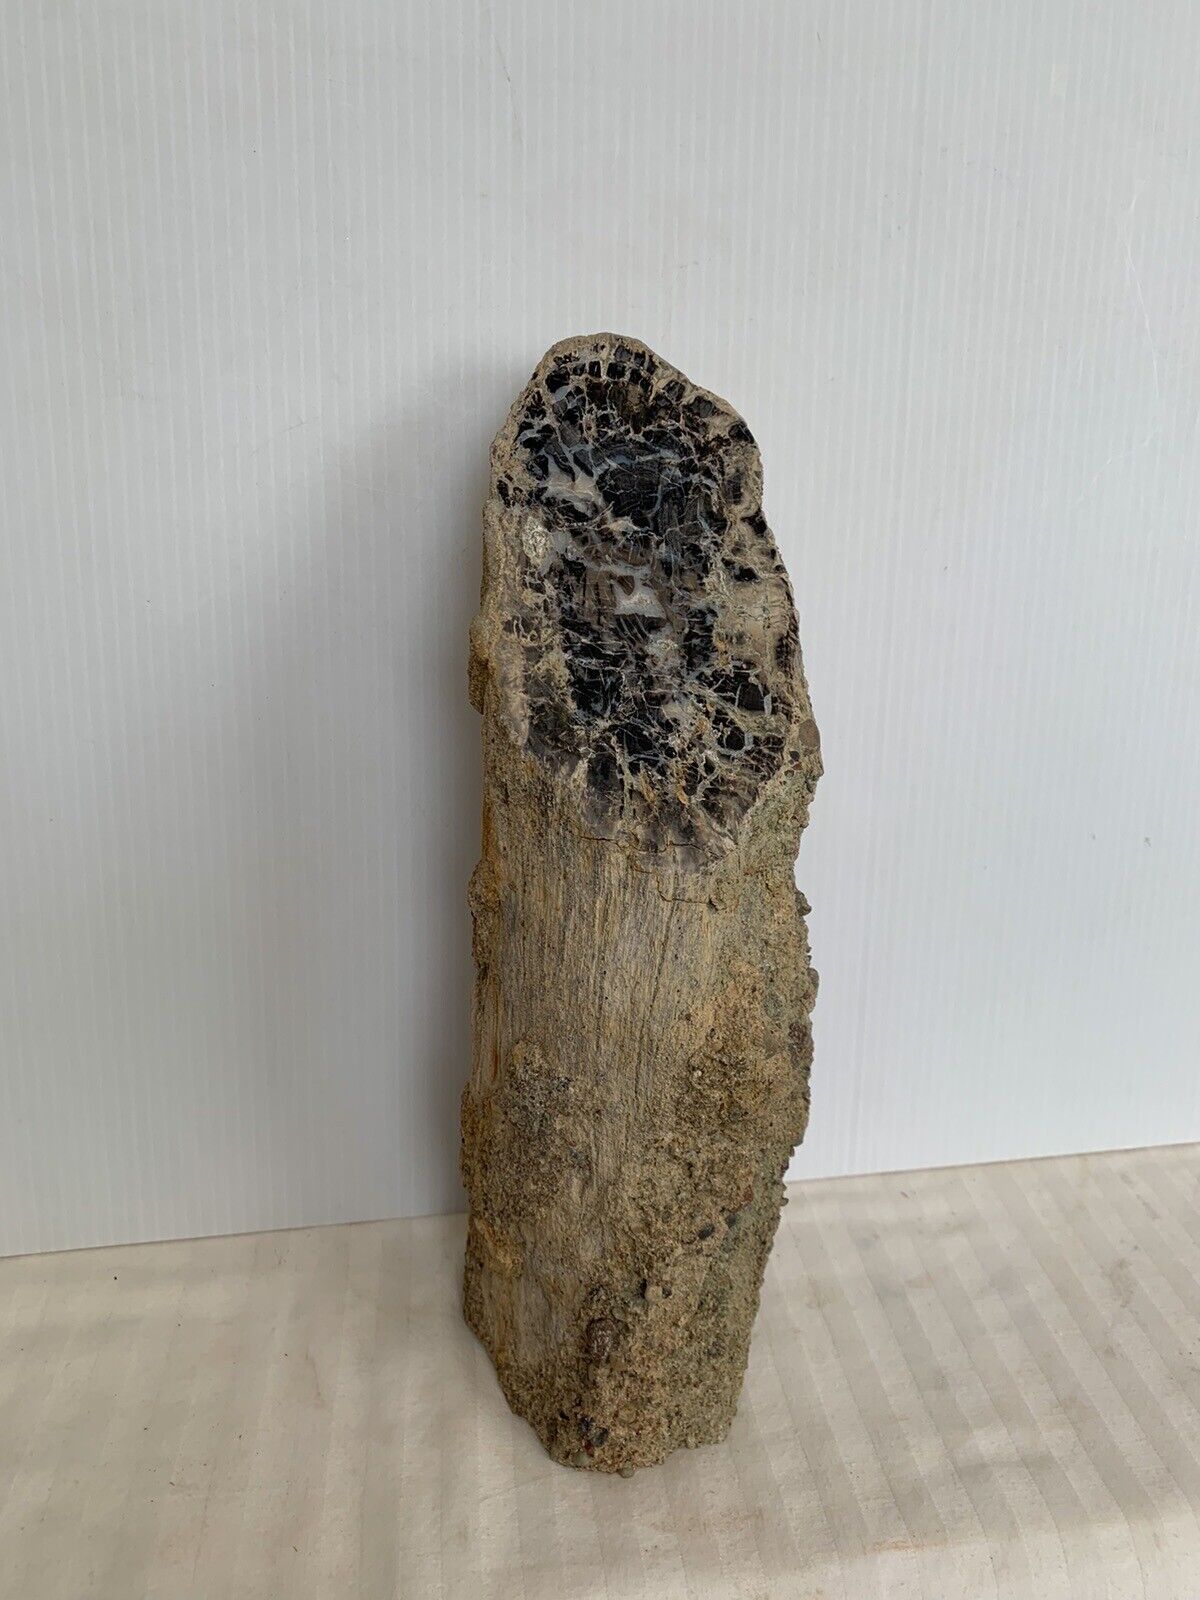 Blue Forest Petrified Wood Limb Cast, Stand Up Display Piece ( Wyoming)